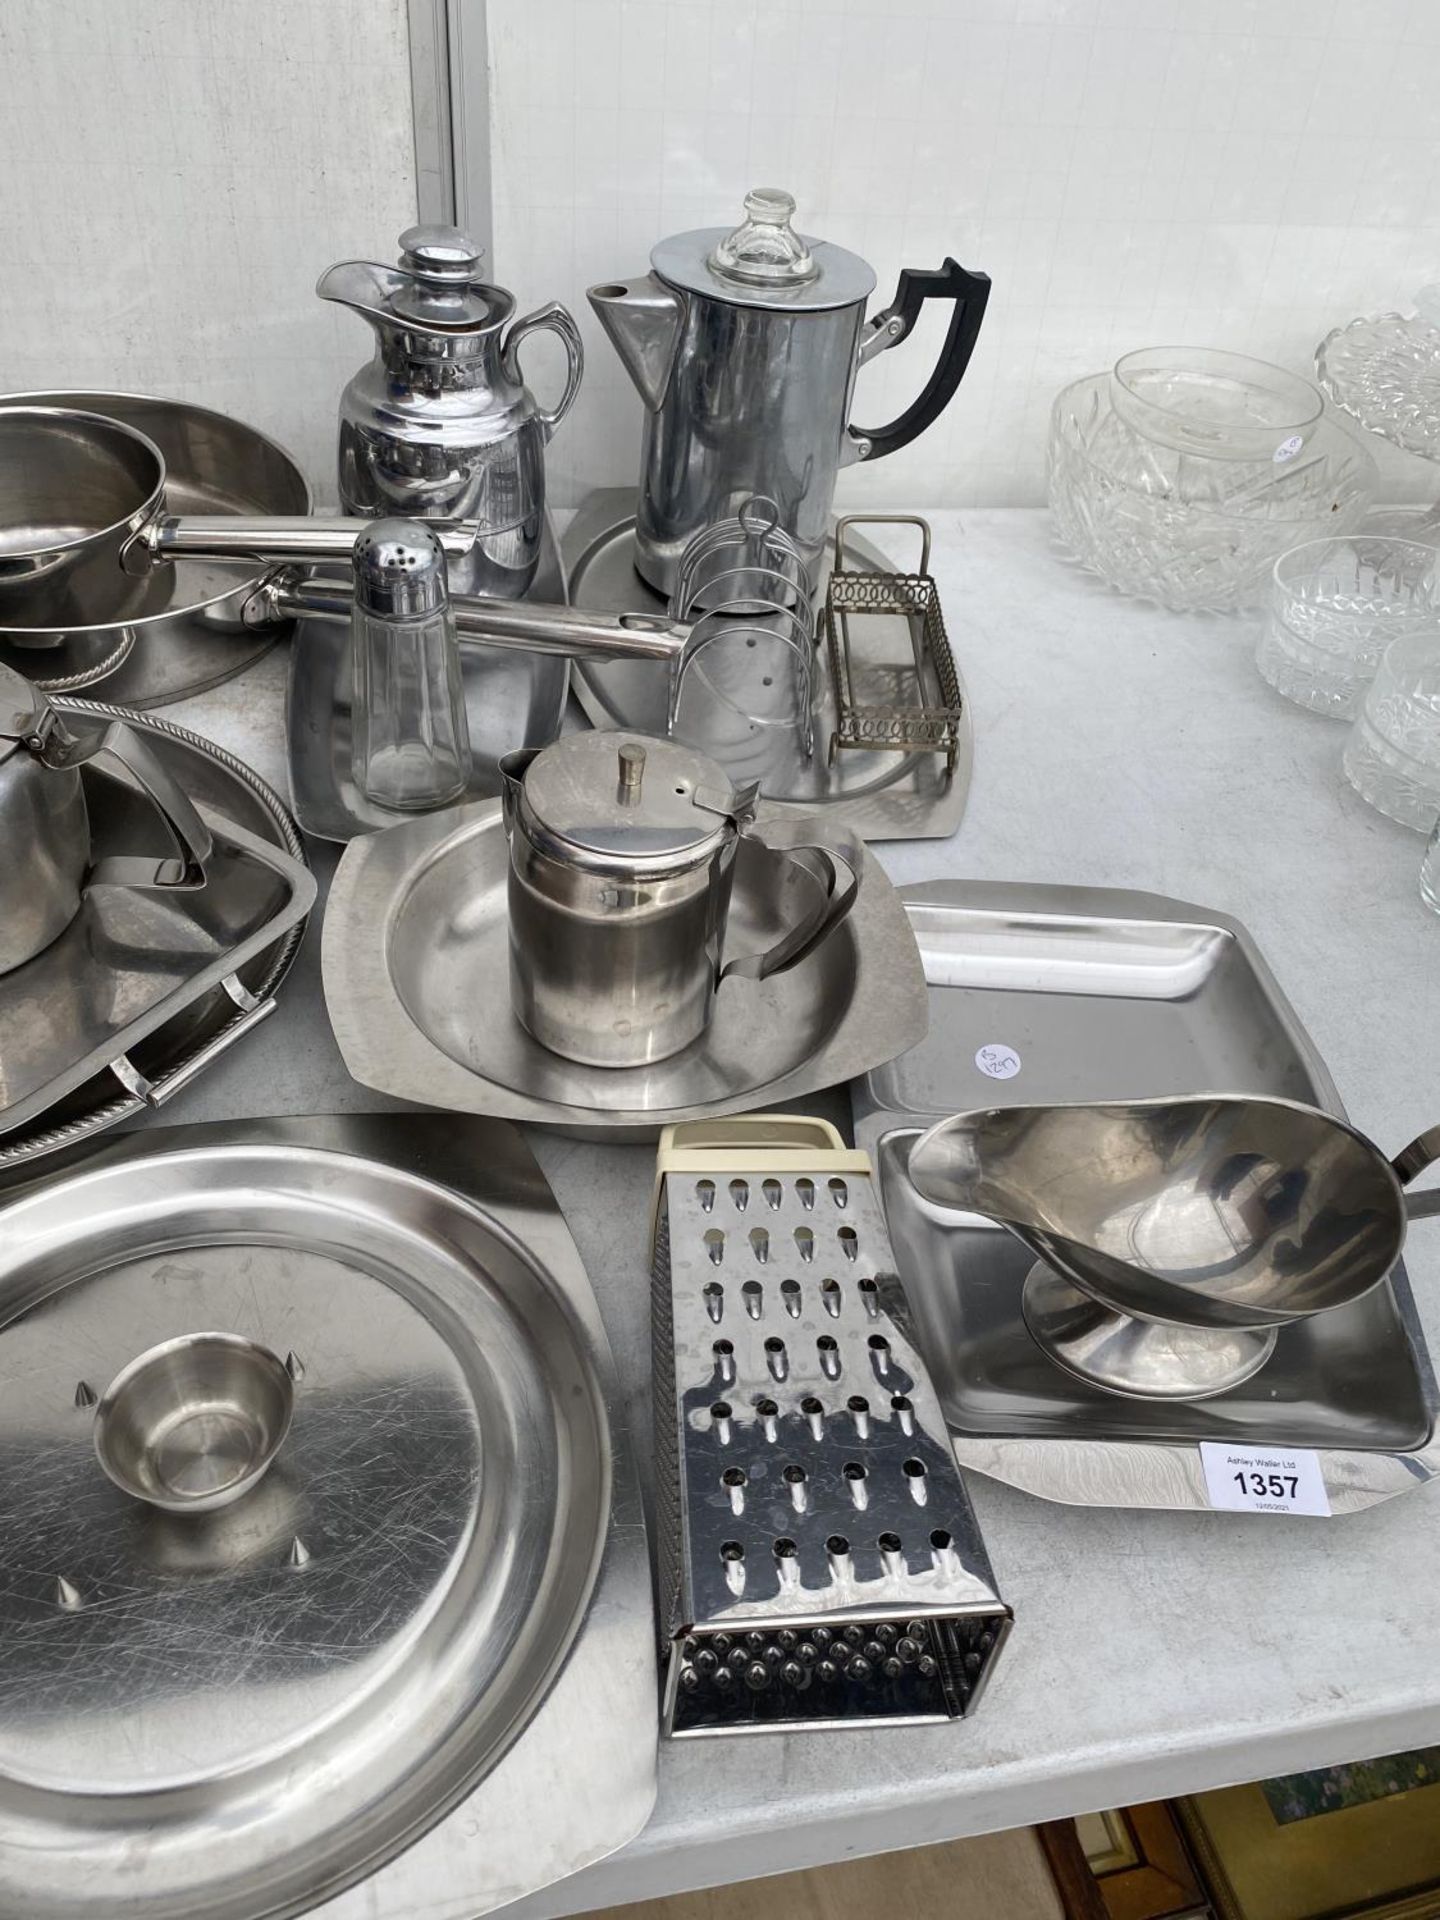 A LARGE ASSORTMENT OF STAINKLESS STEEL KITCHEN WARE TO INCLUDE PANS, TEAPOTS AND DISHES ETC - Image 3 of 3